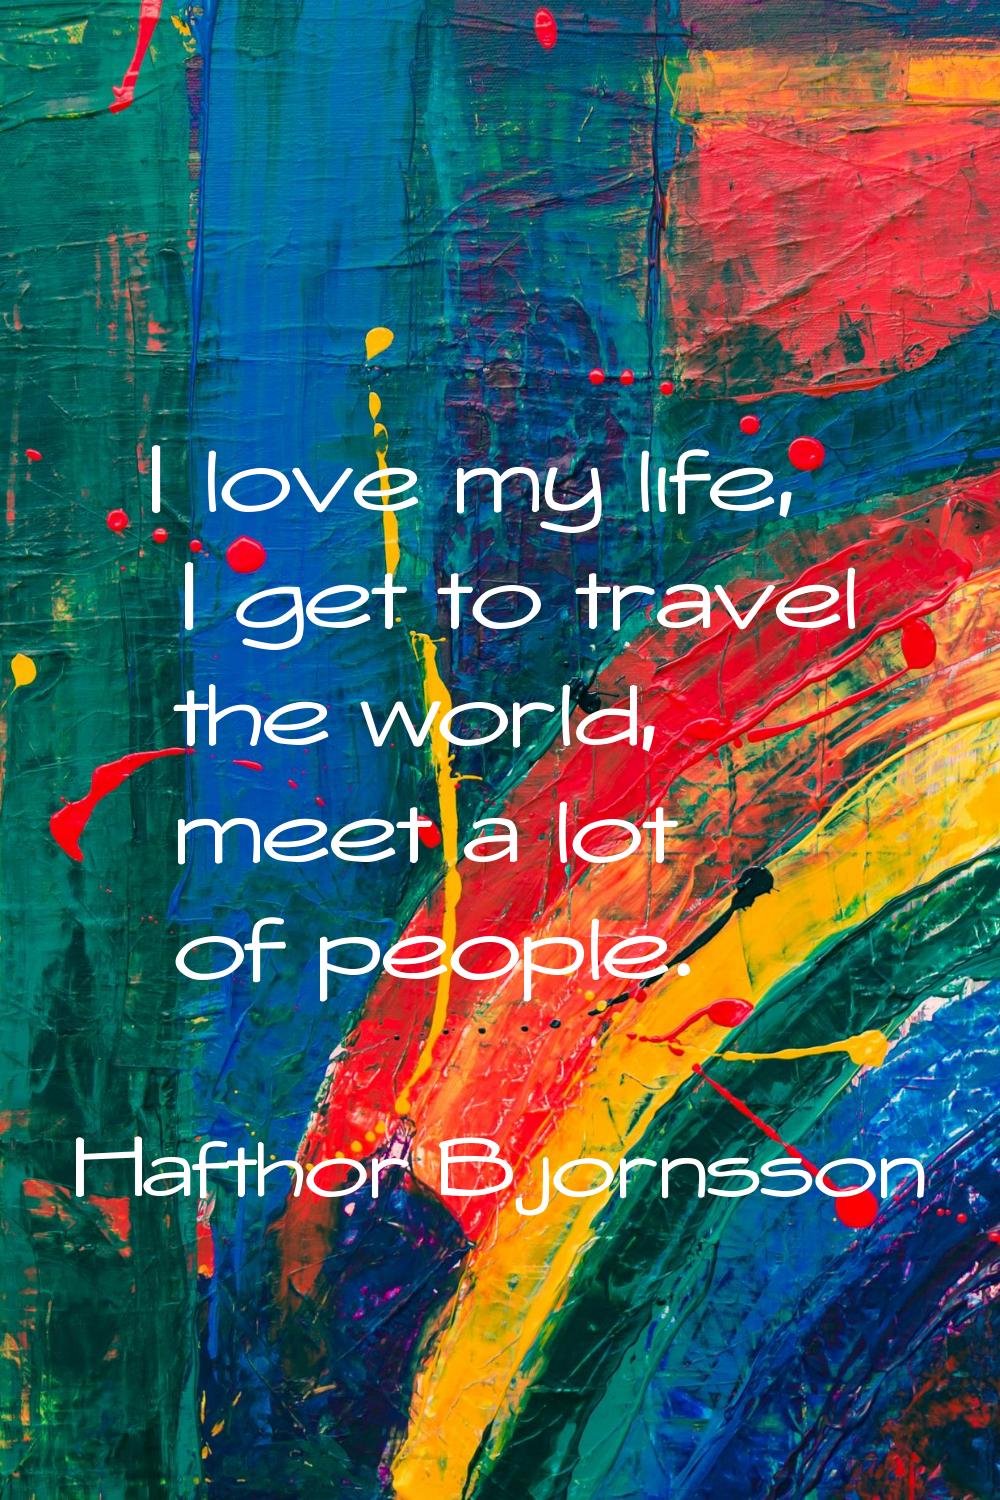 I love my life, I get to travel the world, meet a lot of people.